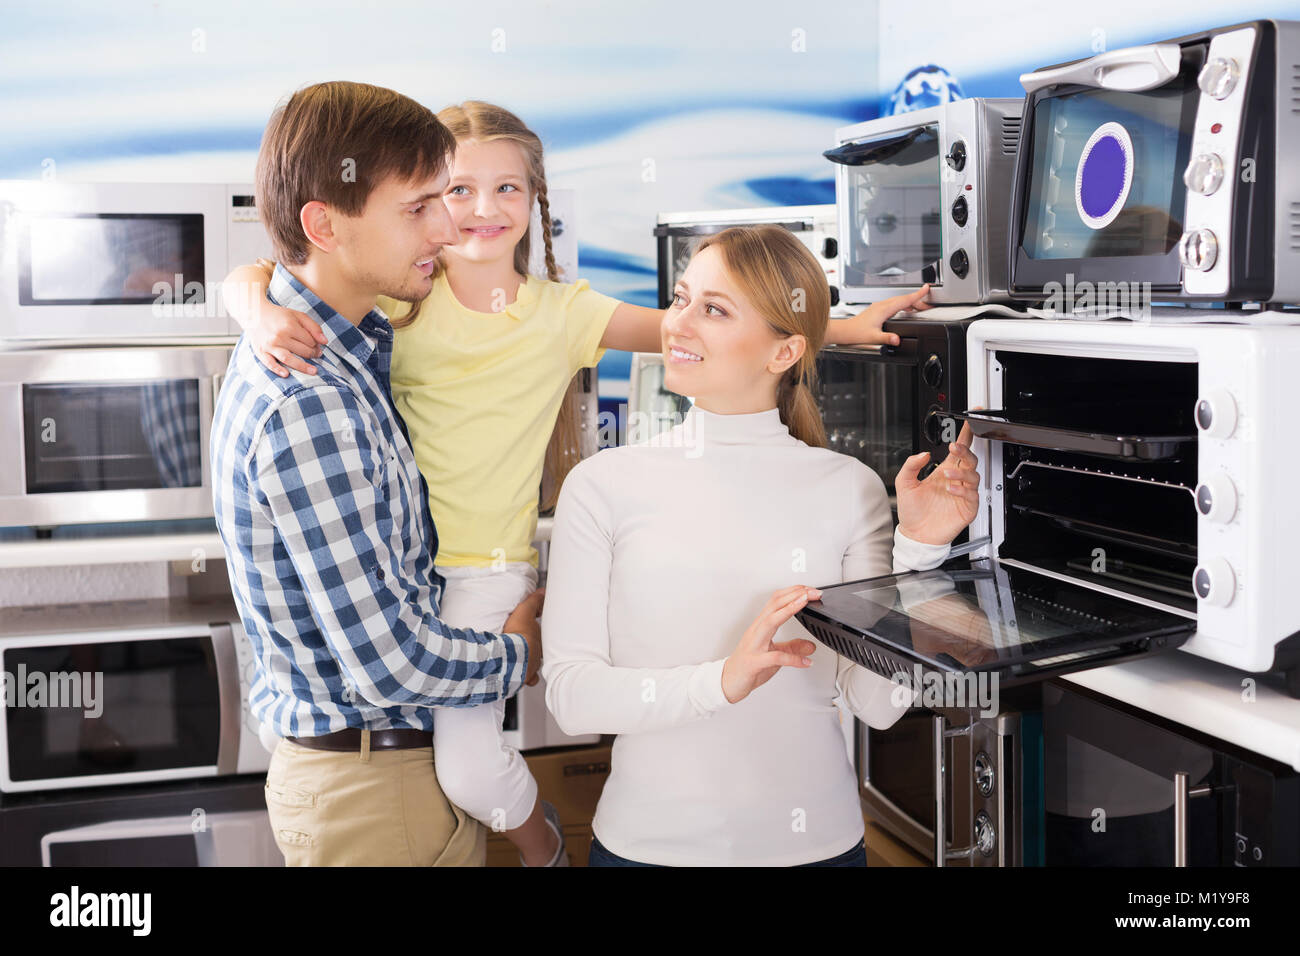 https://c8.alamy.com/comp/M1Y9F8/positivel-young-man-and-woman-with-girl-buying-modern-microwave-in-M1Y9F8.jpg